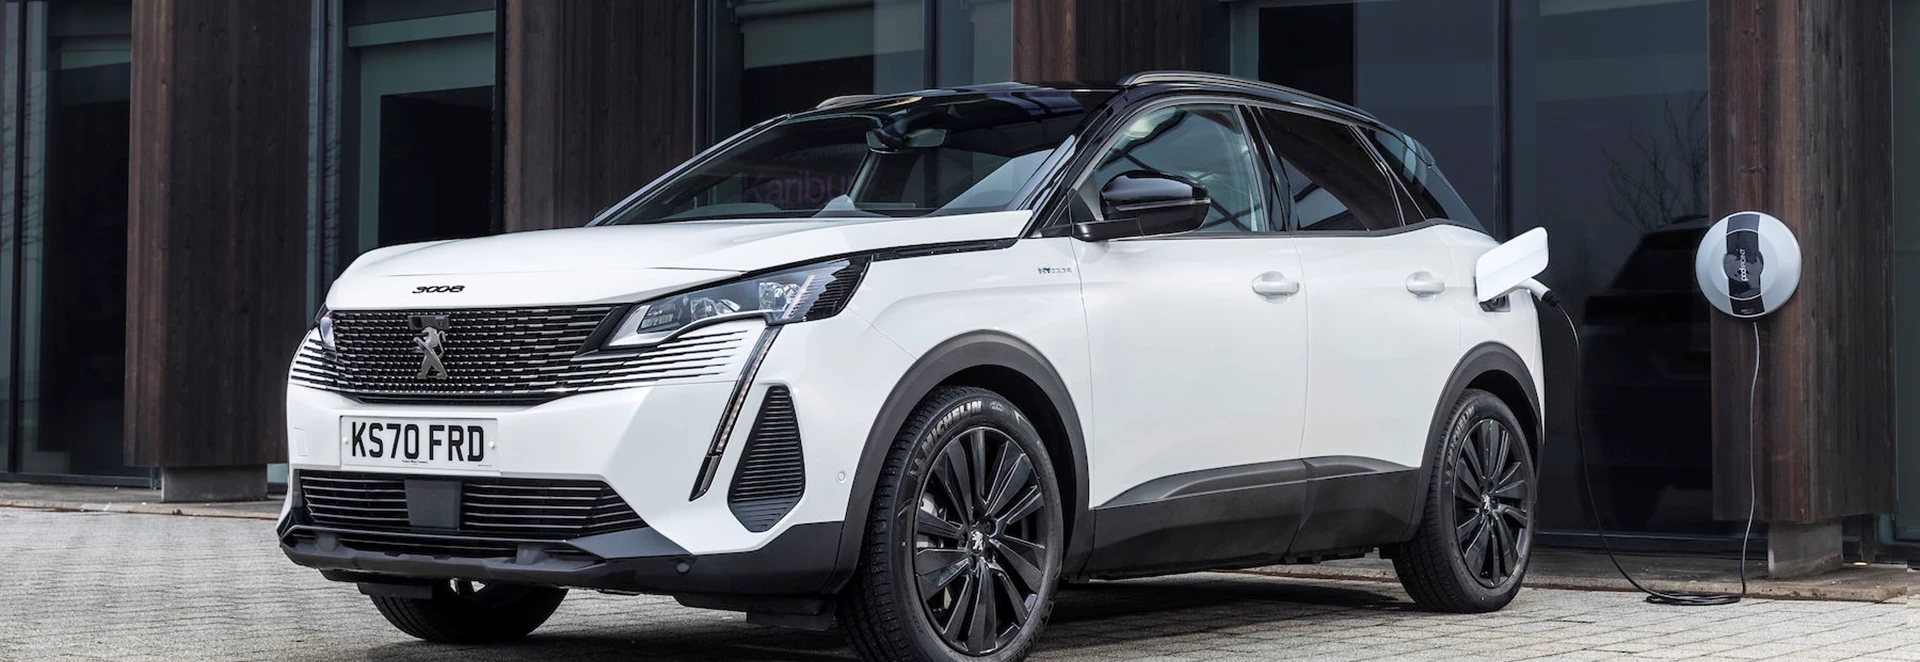 5 reasons why the Peugeot 3008 Hybrid should be on your SUV shortlist 